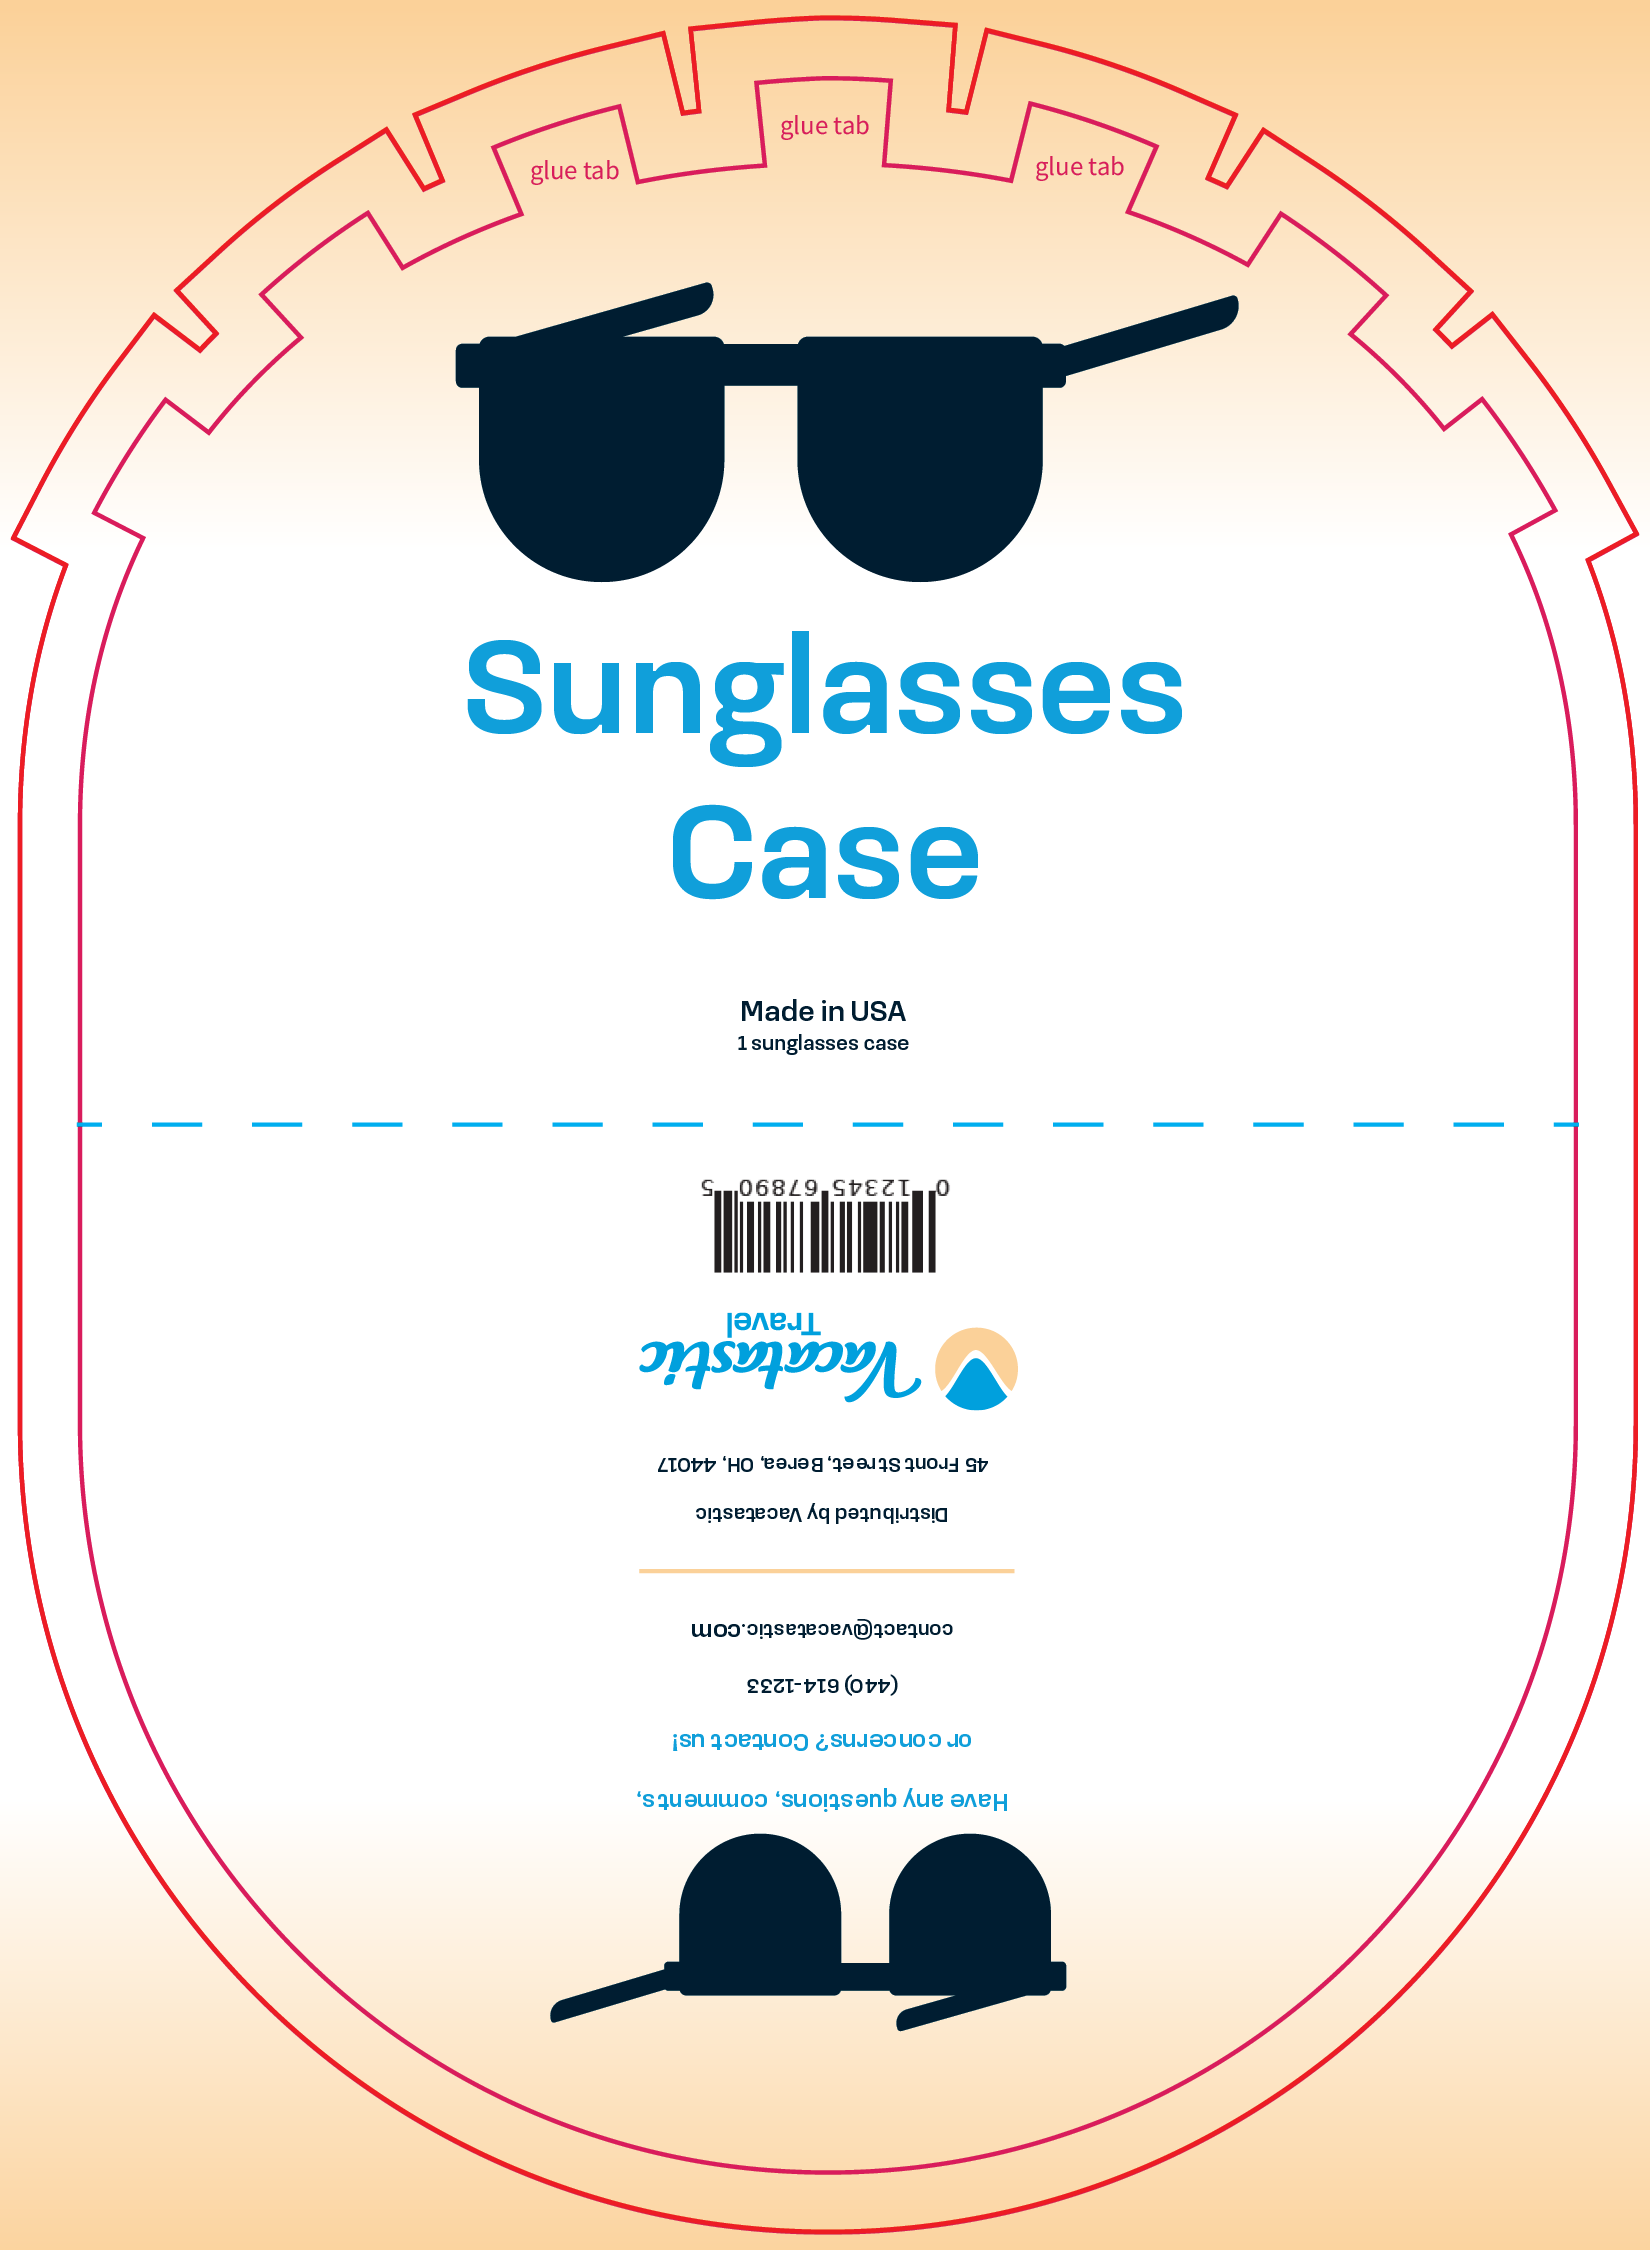 First version of sunglasses case